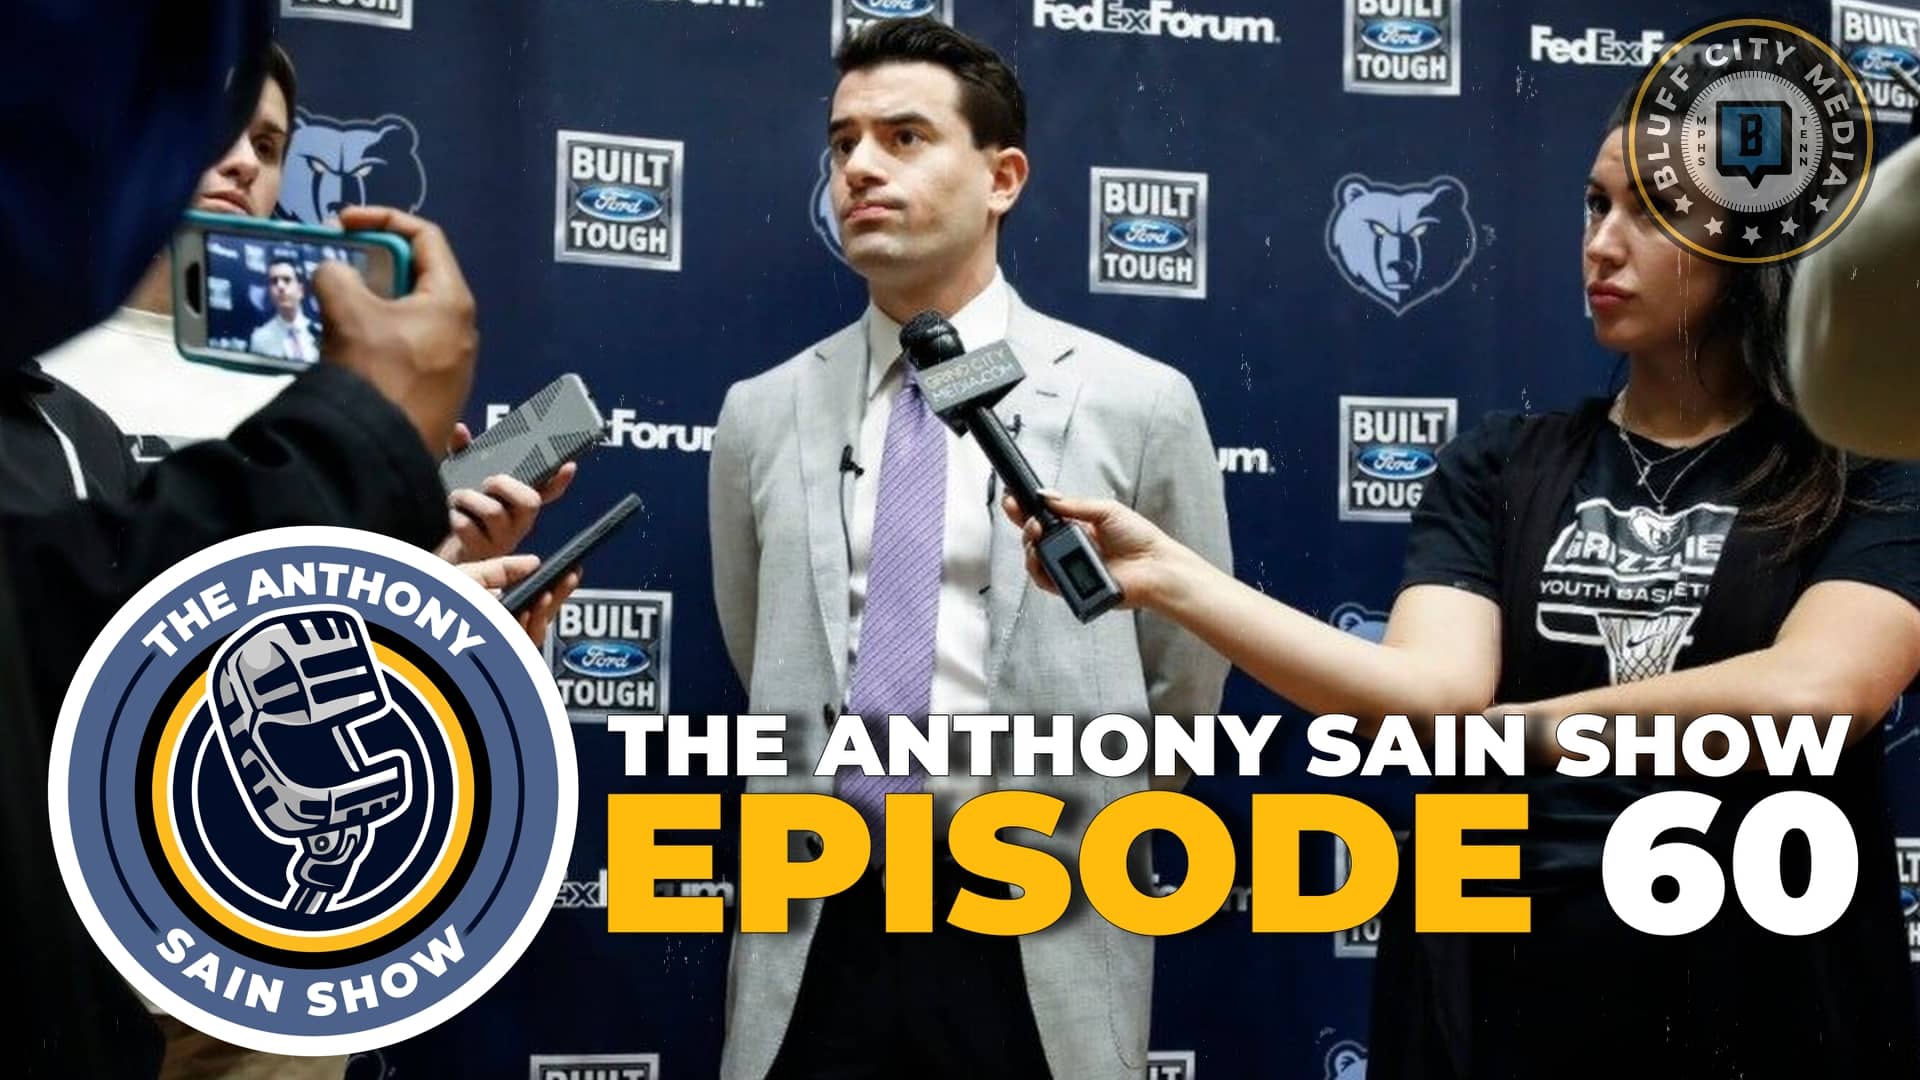 Featured image for “The Anthony Sain Show Ep 60: The Mysterious Play of Santi; Grizzlies’ FO Priorities”